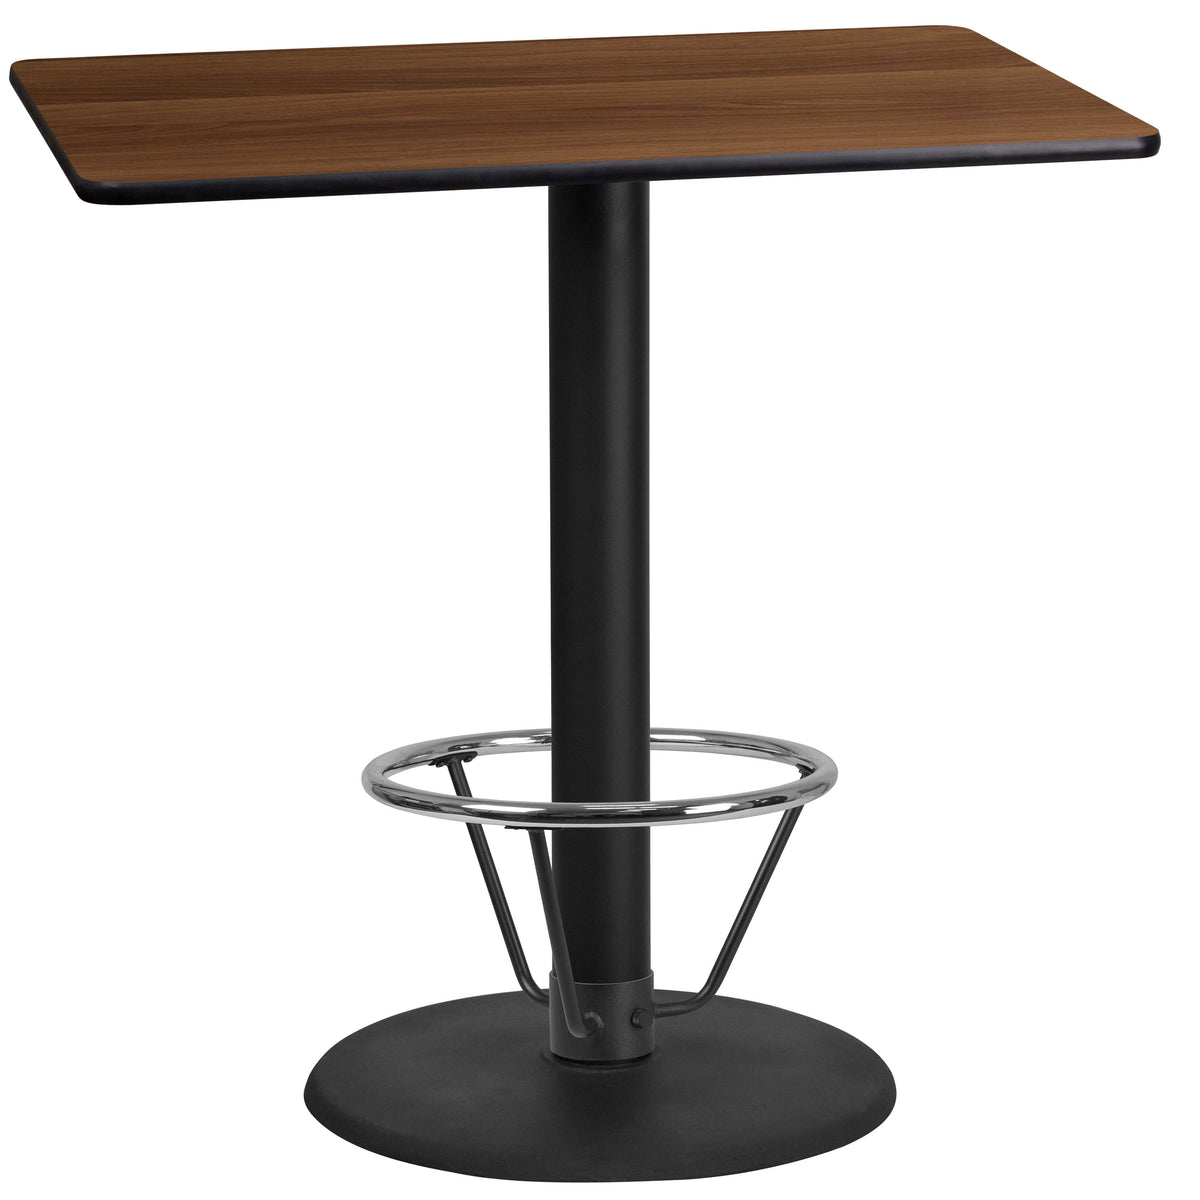 Walnut |#| 24inch x 42inch Walnut Laminate Table Top & 24inch Round Bar Height Base with Foot Ring